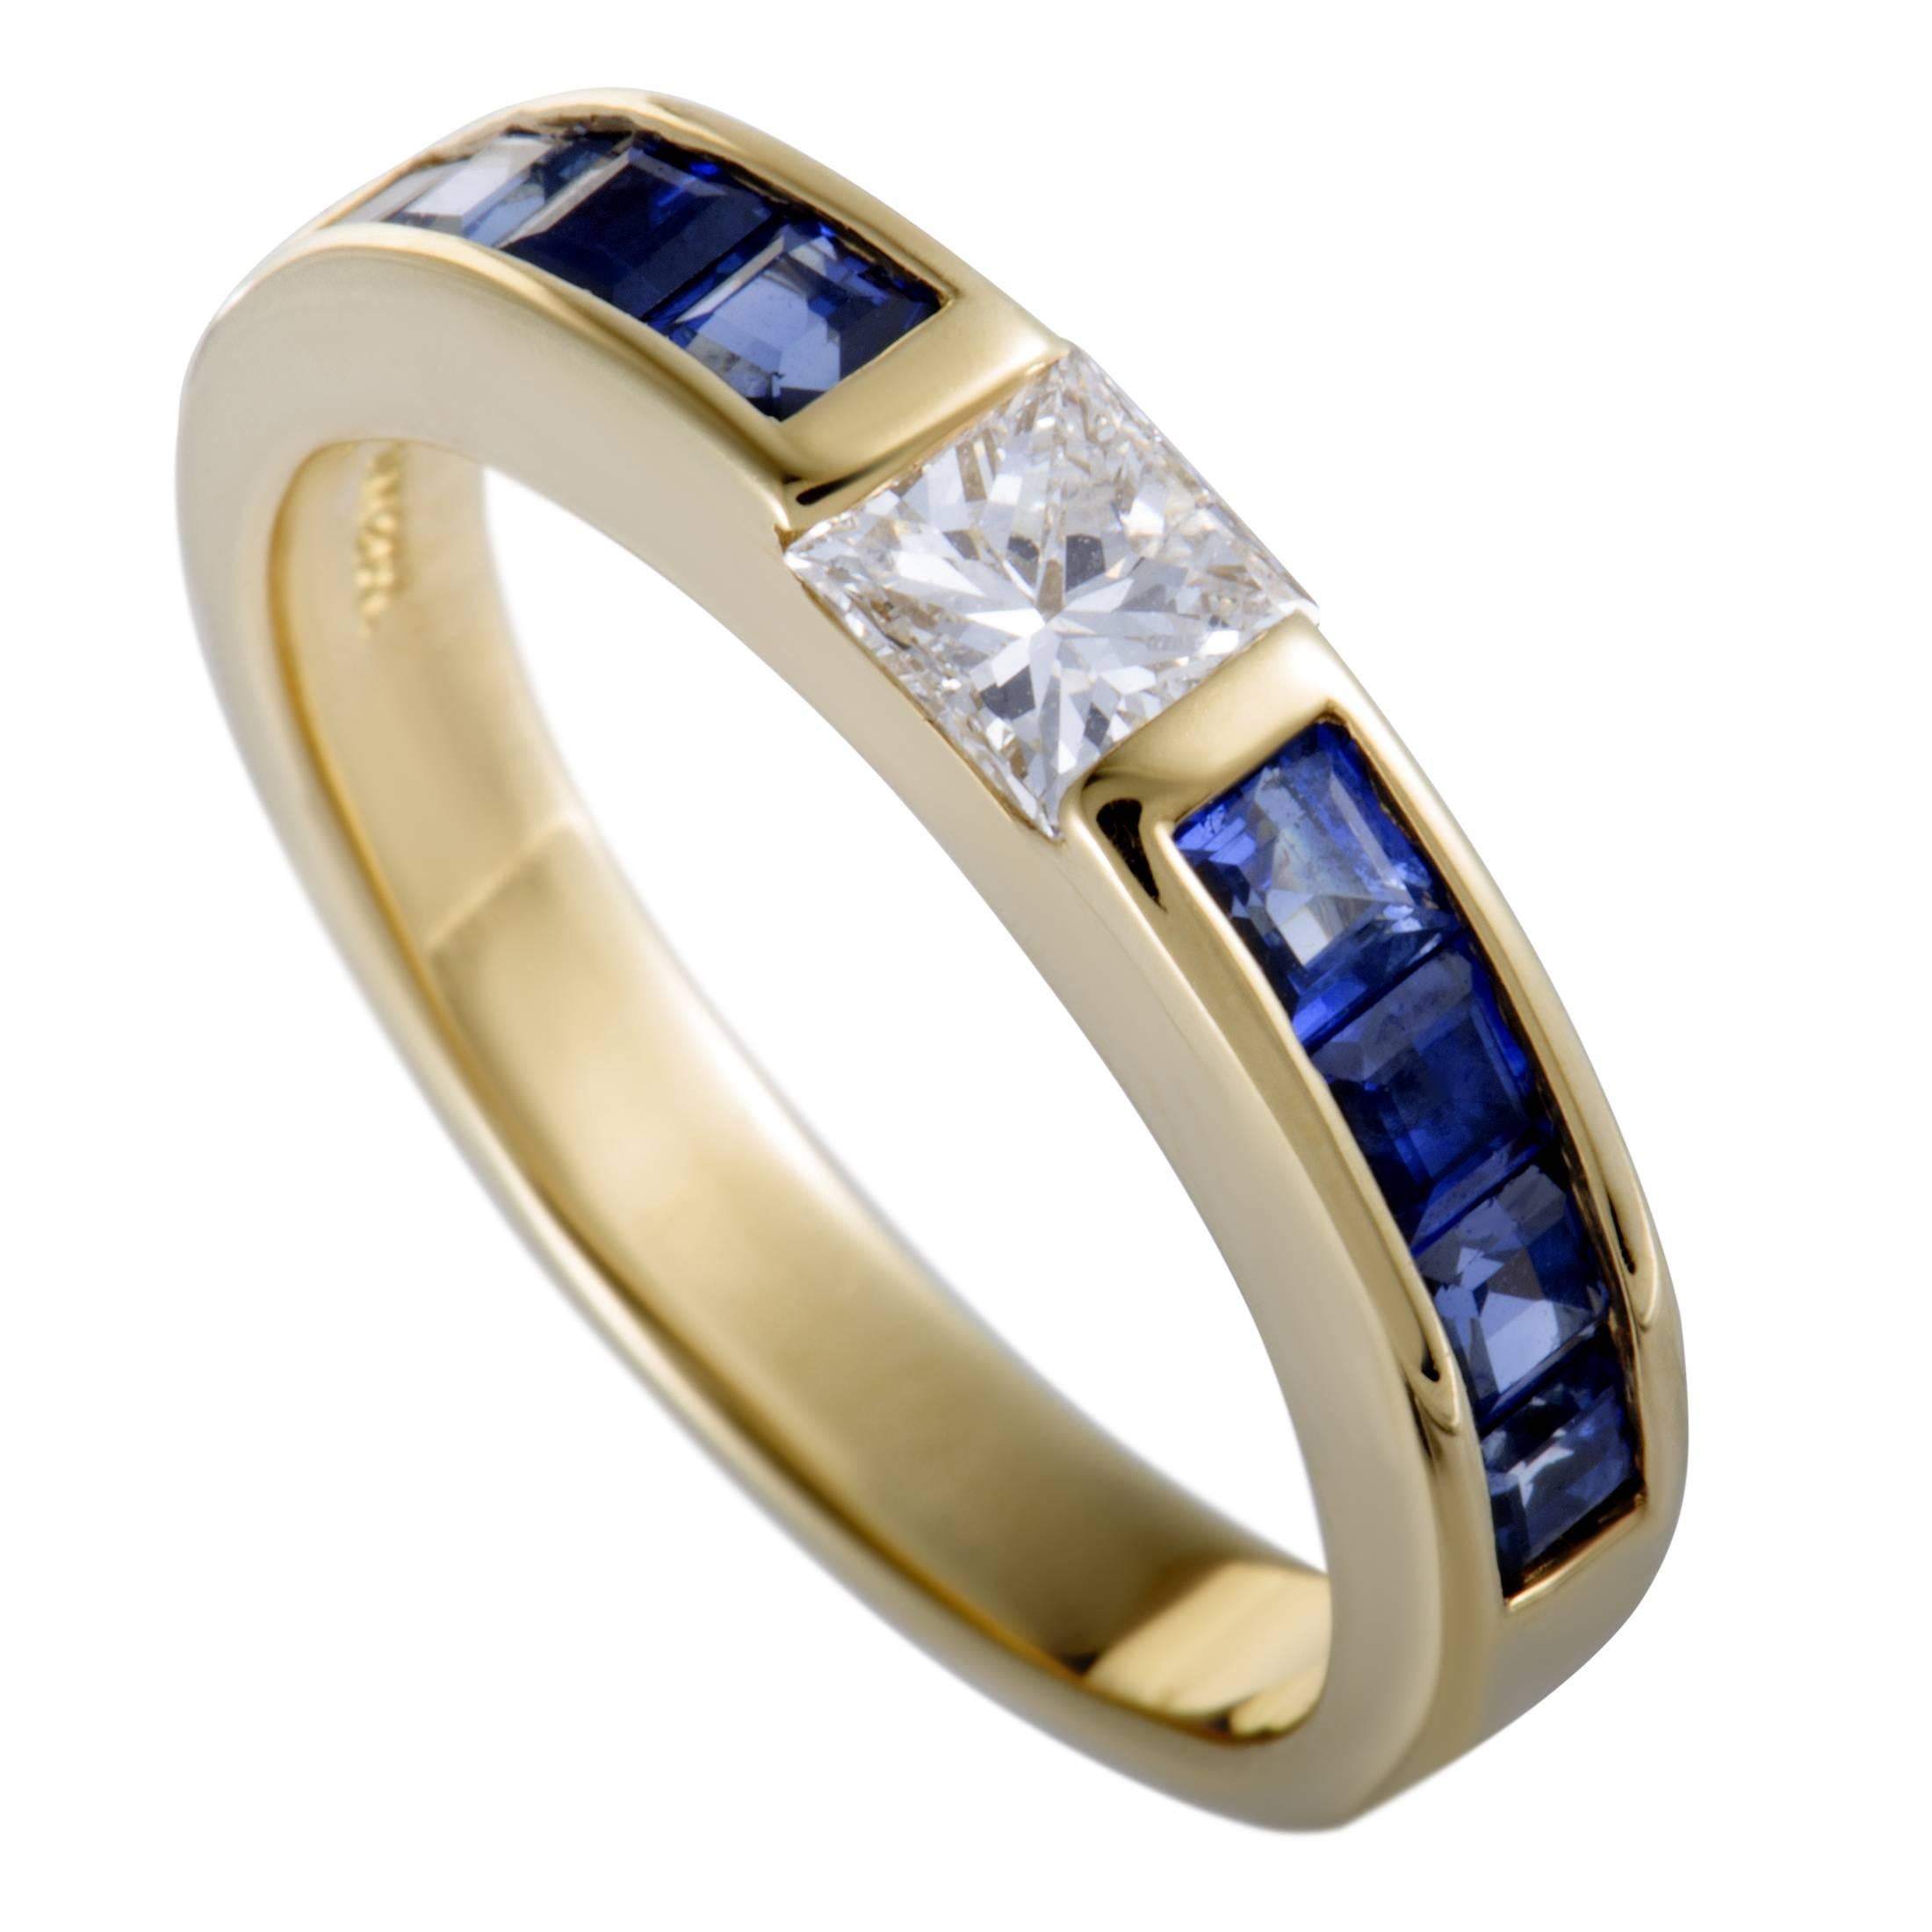 Tiffany & Co. Diamond and Sapphire Invisible Set Yellow Gold Band Ring